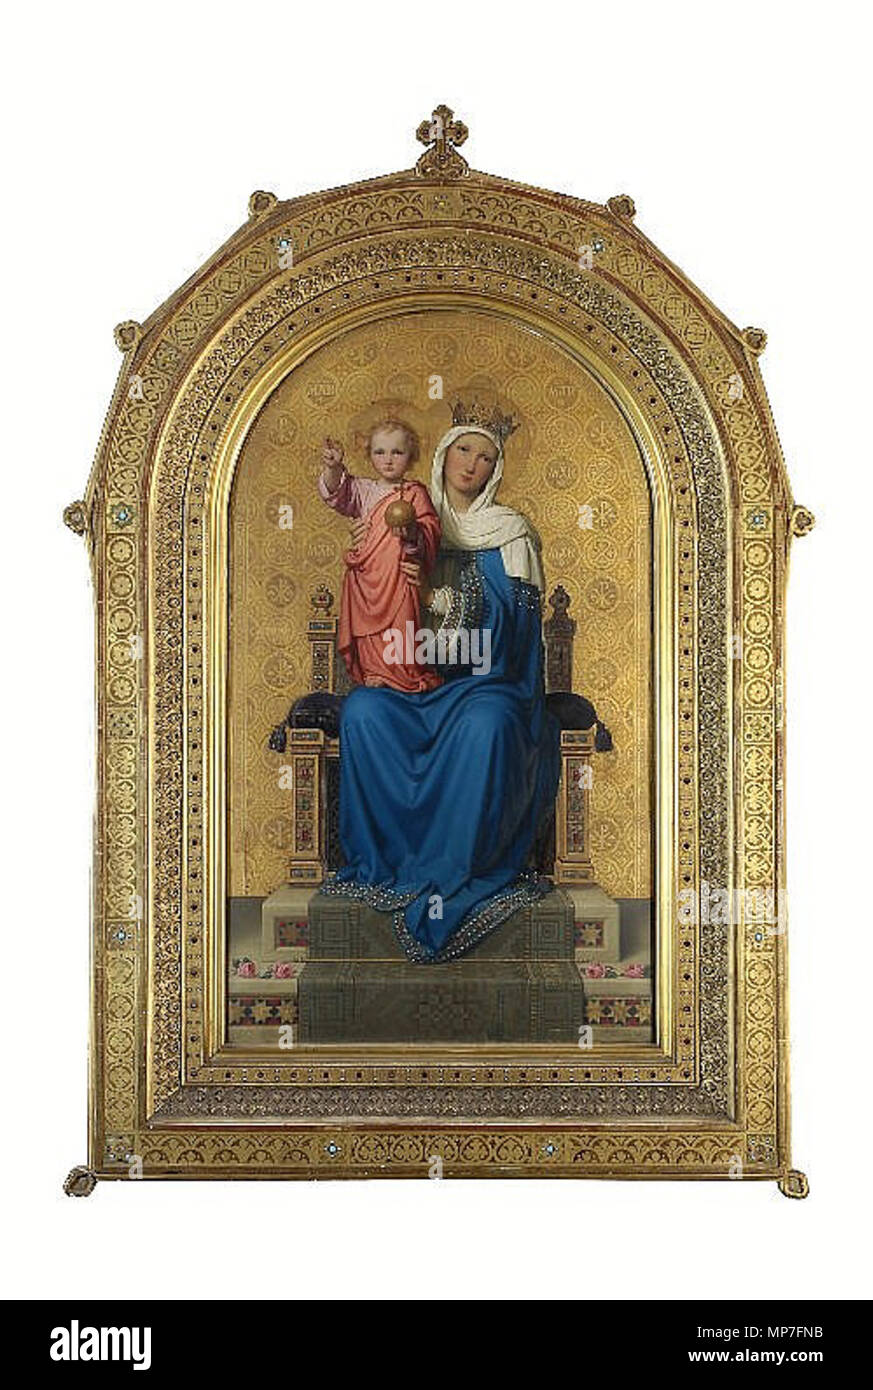 . English: Franz Ittenbach: Mother of the World/the Virgin Mary and Christ Child enthroned', sold at auction by Chorley's in the UK in Oct. 2013, 99cm x 57cm (39” x 22.5”). 1872.   Franz Ittenbach  (1813–1879)     Alternative names franz ittenbach; f. ittenbach; Ittenbach  Description German painter  Date of birth/death 18 April 1813 1 December 1879  Location of birth/death Königswinter Düsseldorf  Work location Munich (1842); Düsseldorf (1831 - 1839); Rome (1839 - 1842); Düsseldorf (1842 - 1879)  Authority control  : Q185302 VIAF: 71666509 ISNI: 0000 0000 6663 965X ULAN: 500059821 LCCN: nr910 Stock Photo